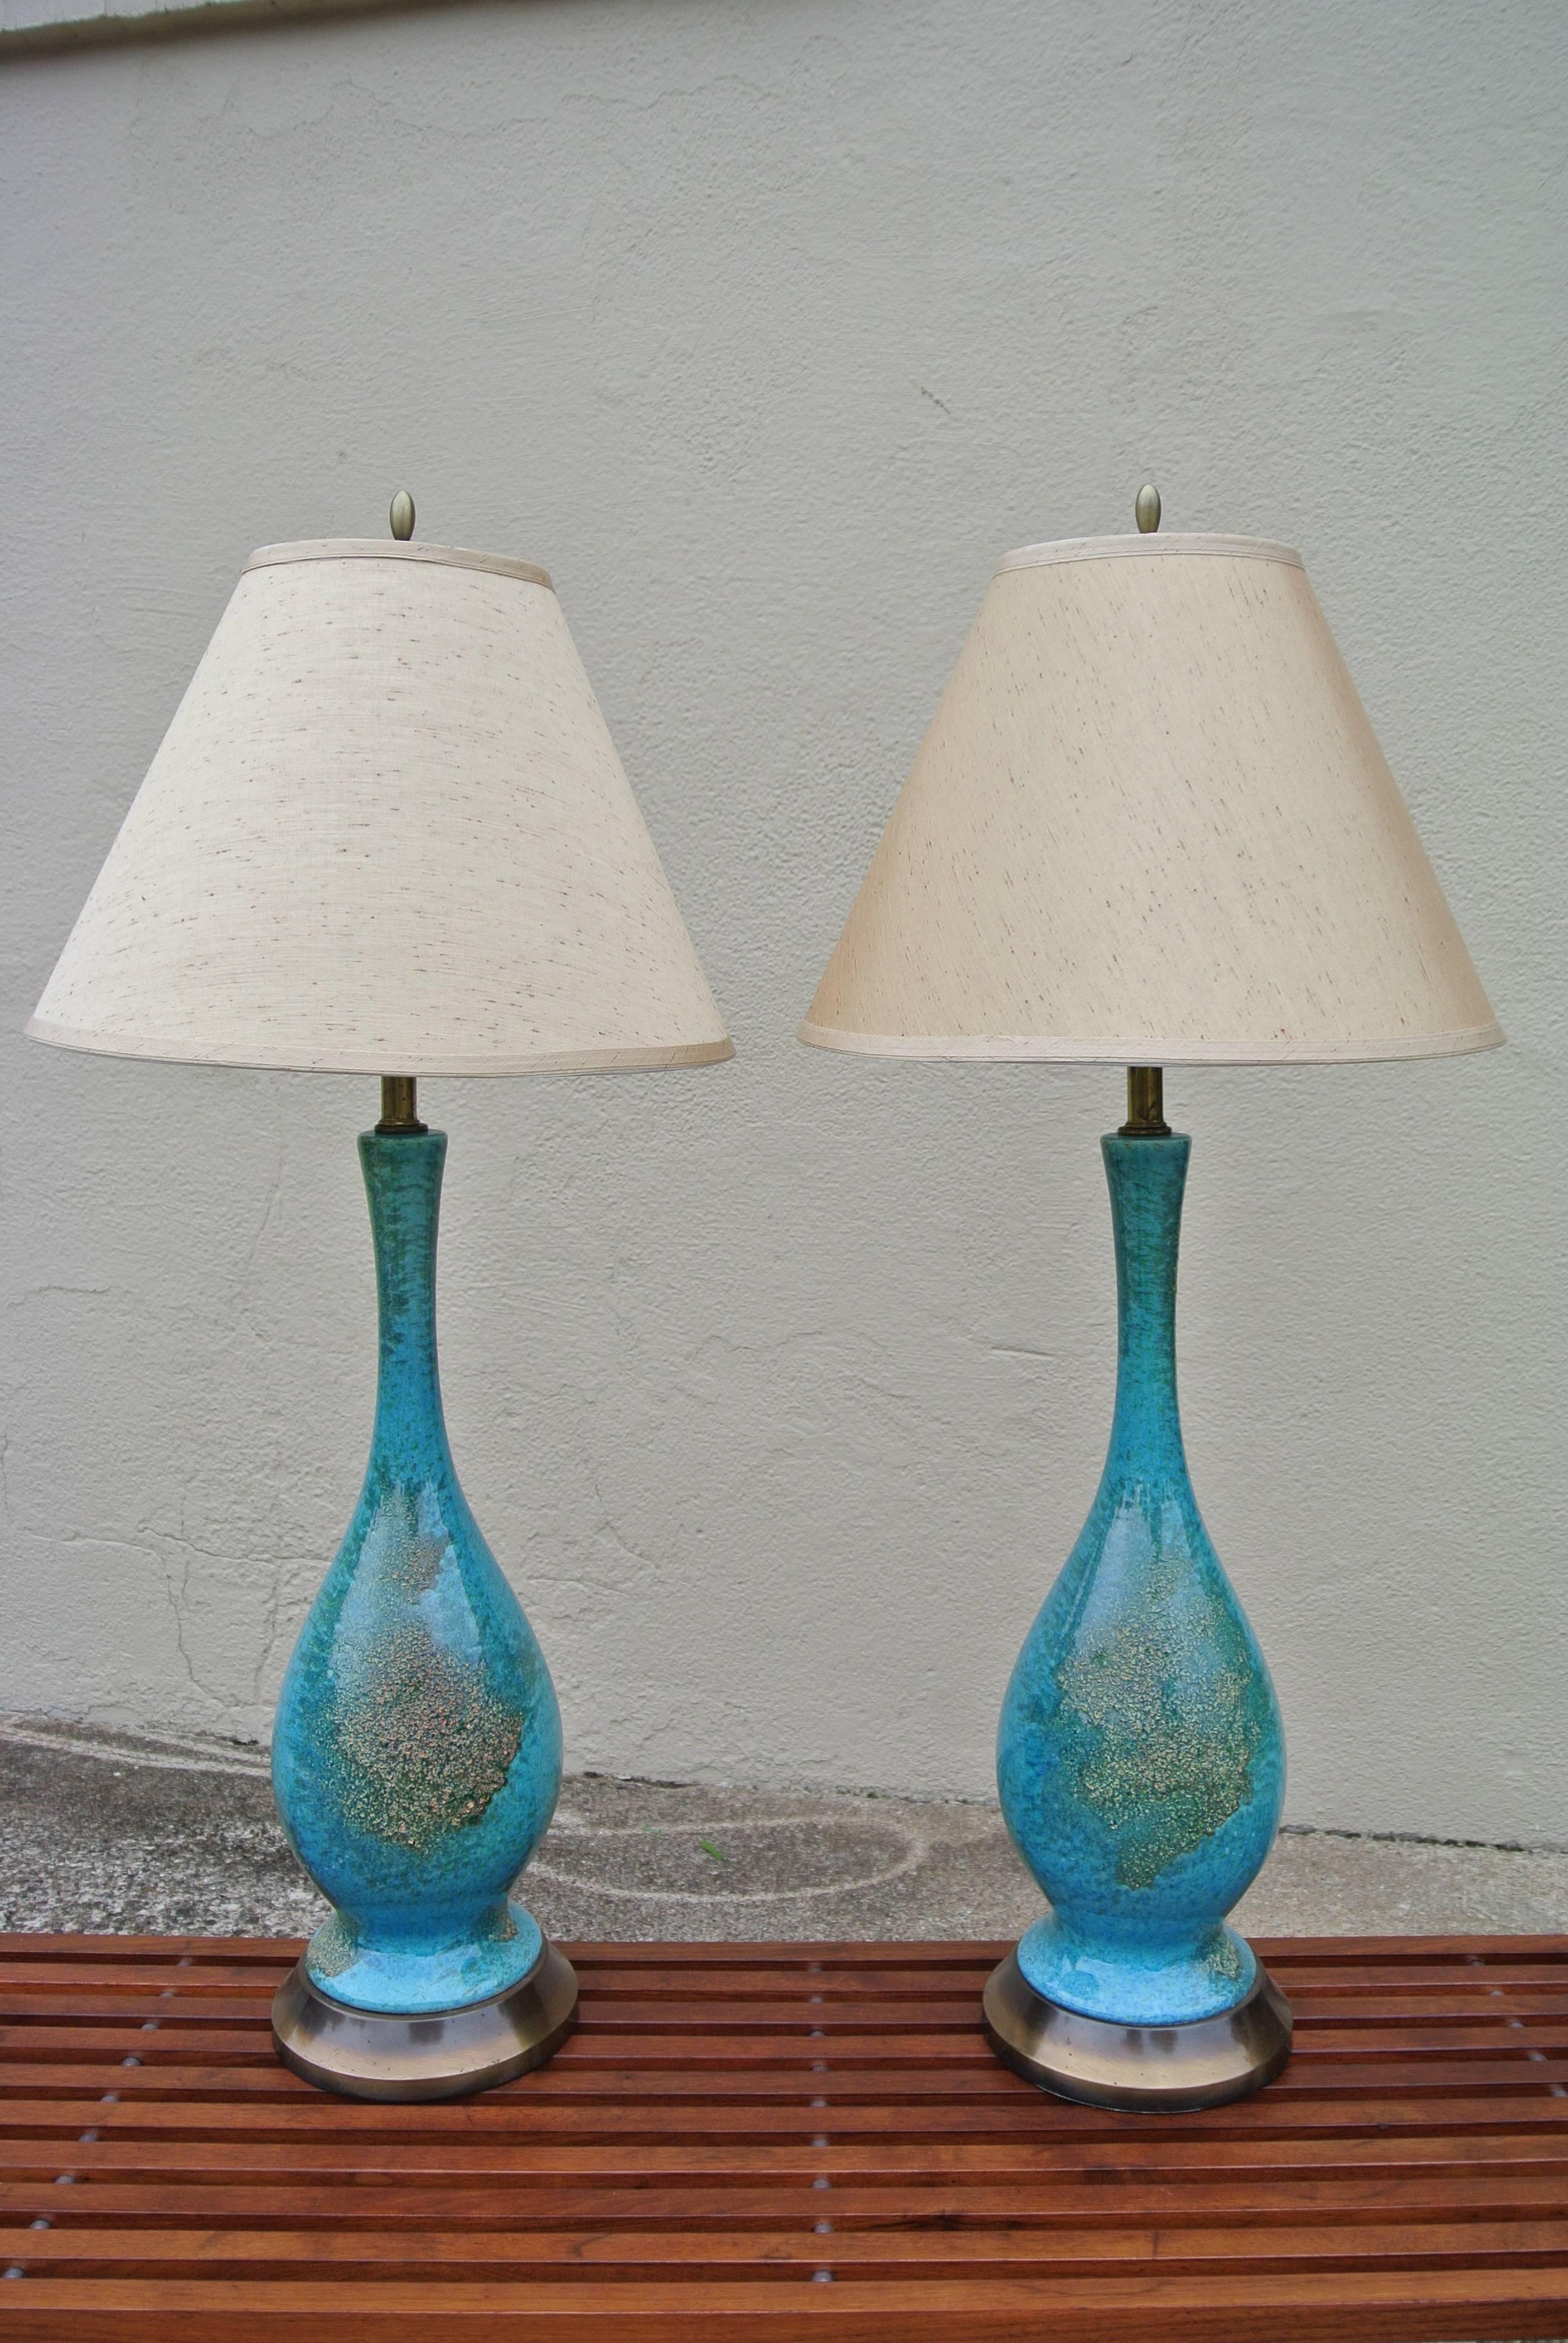 Beautiful pair of Ceramic glazed lamps with silk shades.